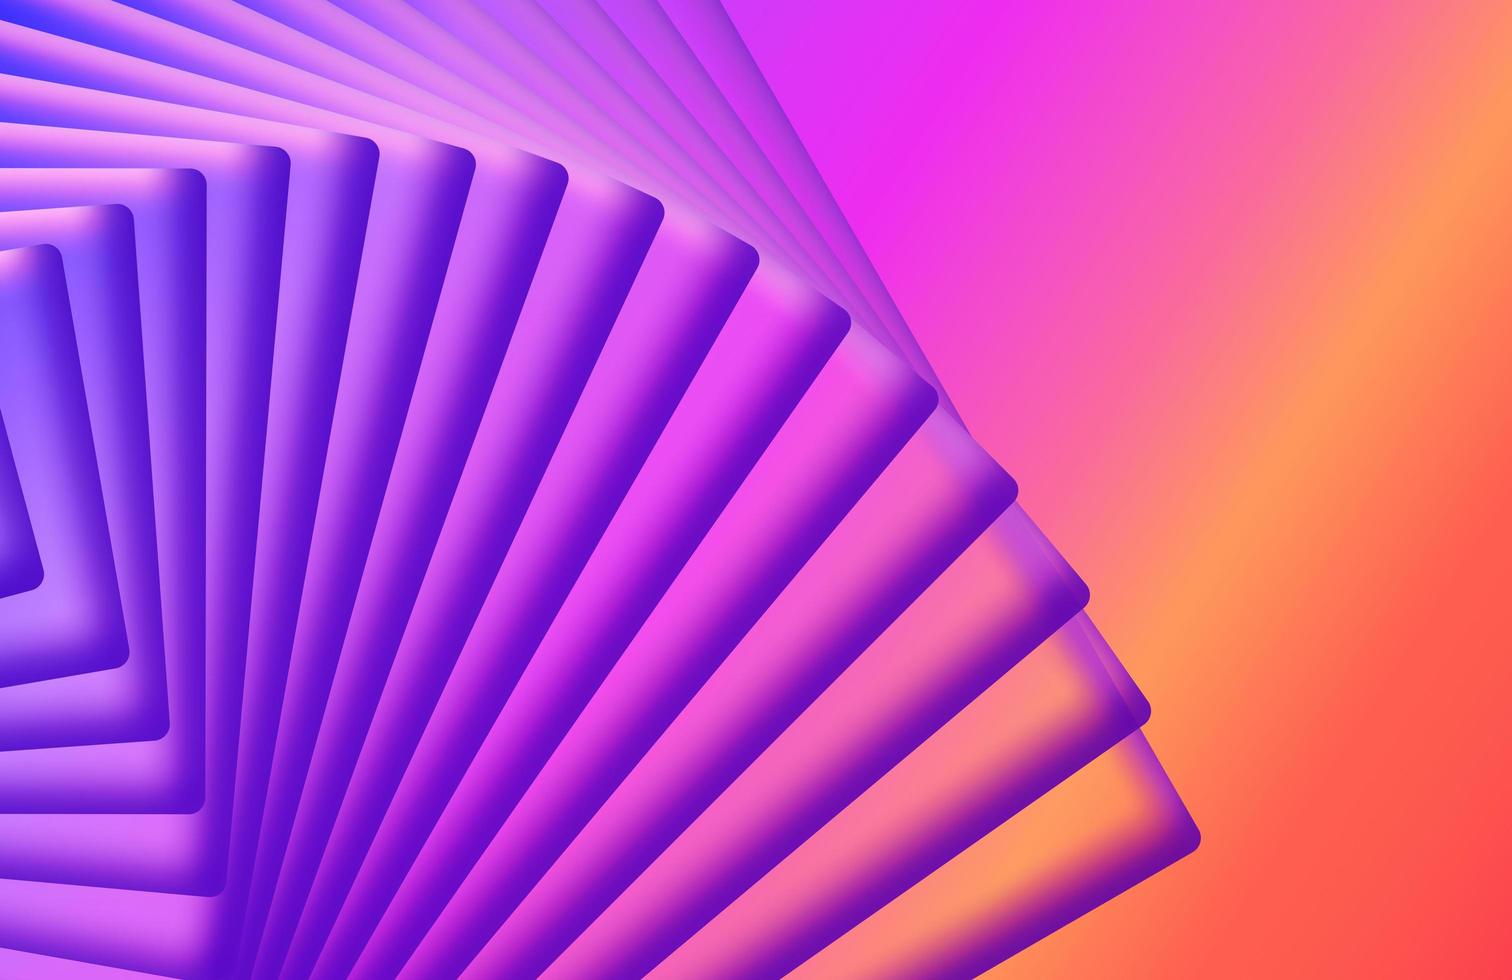 Purple and orange background with a spiral pattern. photo